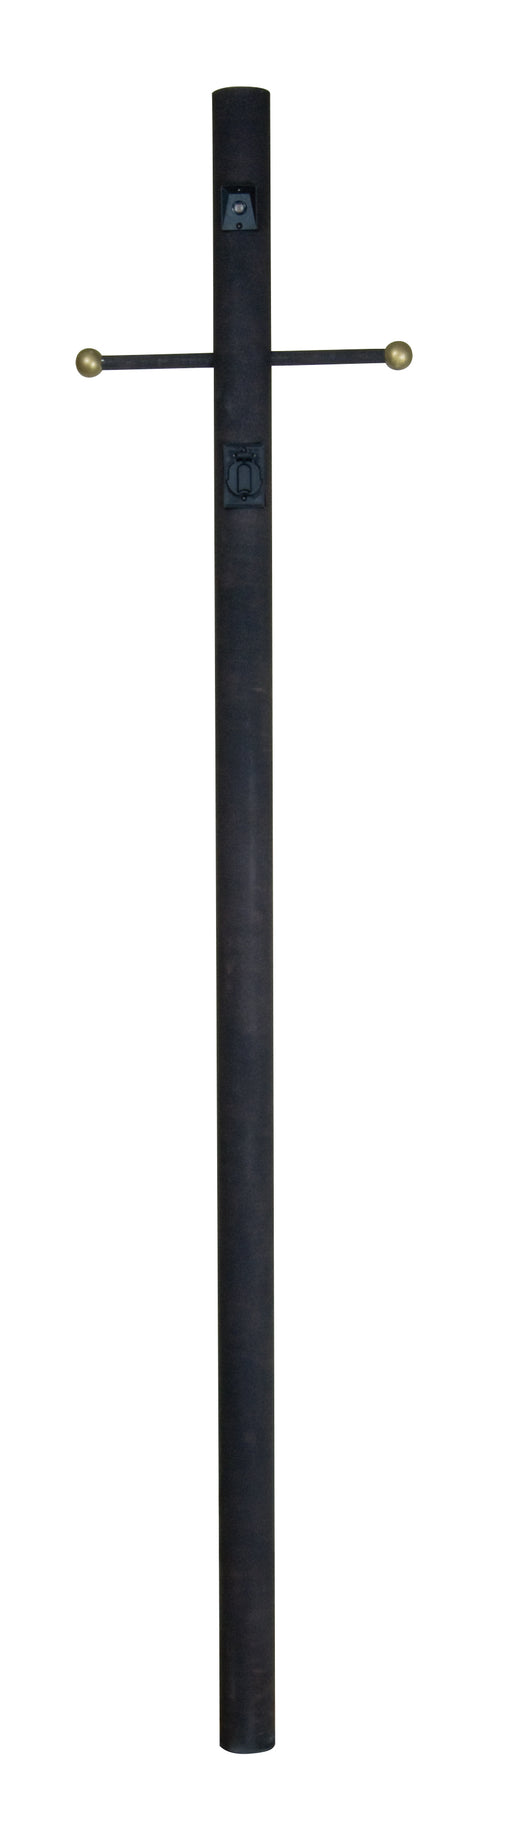 Craftmade 84" Smooth Direct Burial Post w/ Photocell & Convenience Outlet in Textured Black